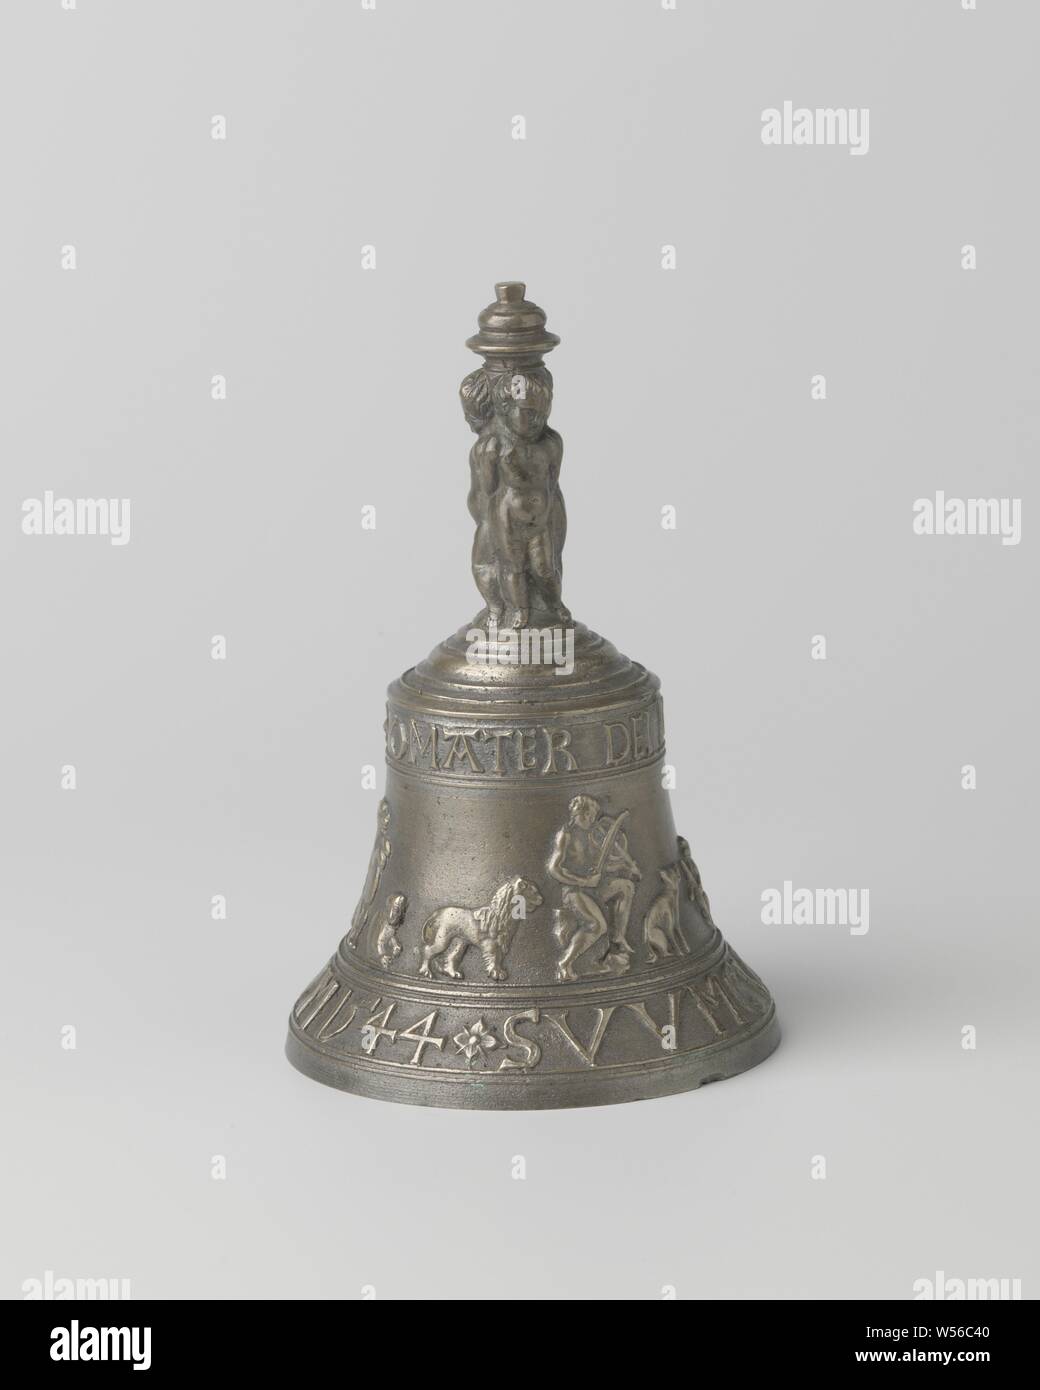 Table bell with inscription: ME FECIT PER IOHAN DE FINE Ao 1544 etc, The object consists of three parts: the bell-shaped bell with the handle, the iron eye and the iron clapper. On the lower edge of the bell the inscription: ME FECIT PER IOHAN DE FINE Ao 1544. Above, on the front and back, two medallions formed by wreaths, one showing the heads of a woman and a man with laurel wreath and the other showing a man's head. The wreaths are held up by one hand by putti, who point to high Renaissance vases with the other hand. Above the medallions and the two vases are ram heads, which are connected Stock Photo